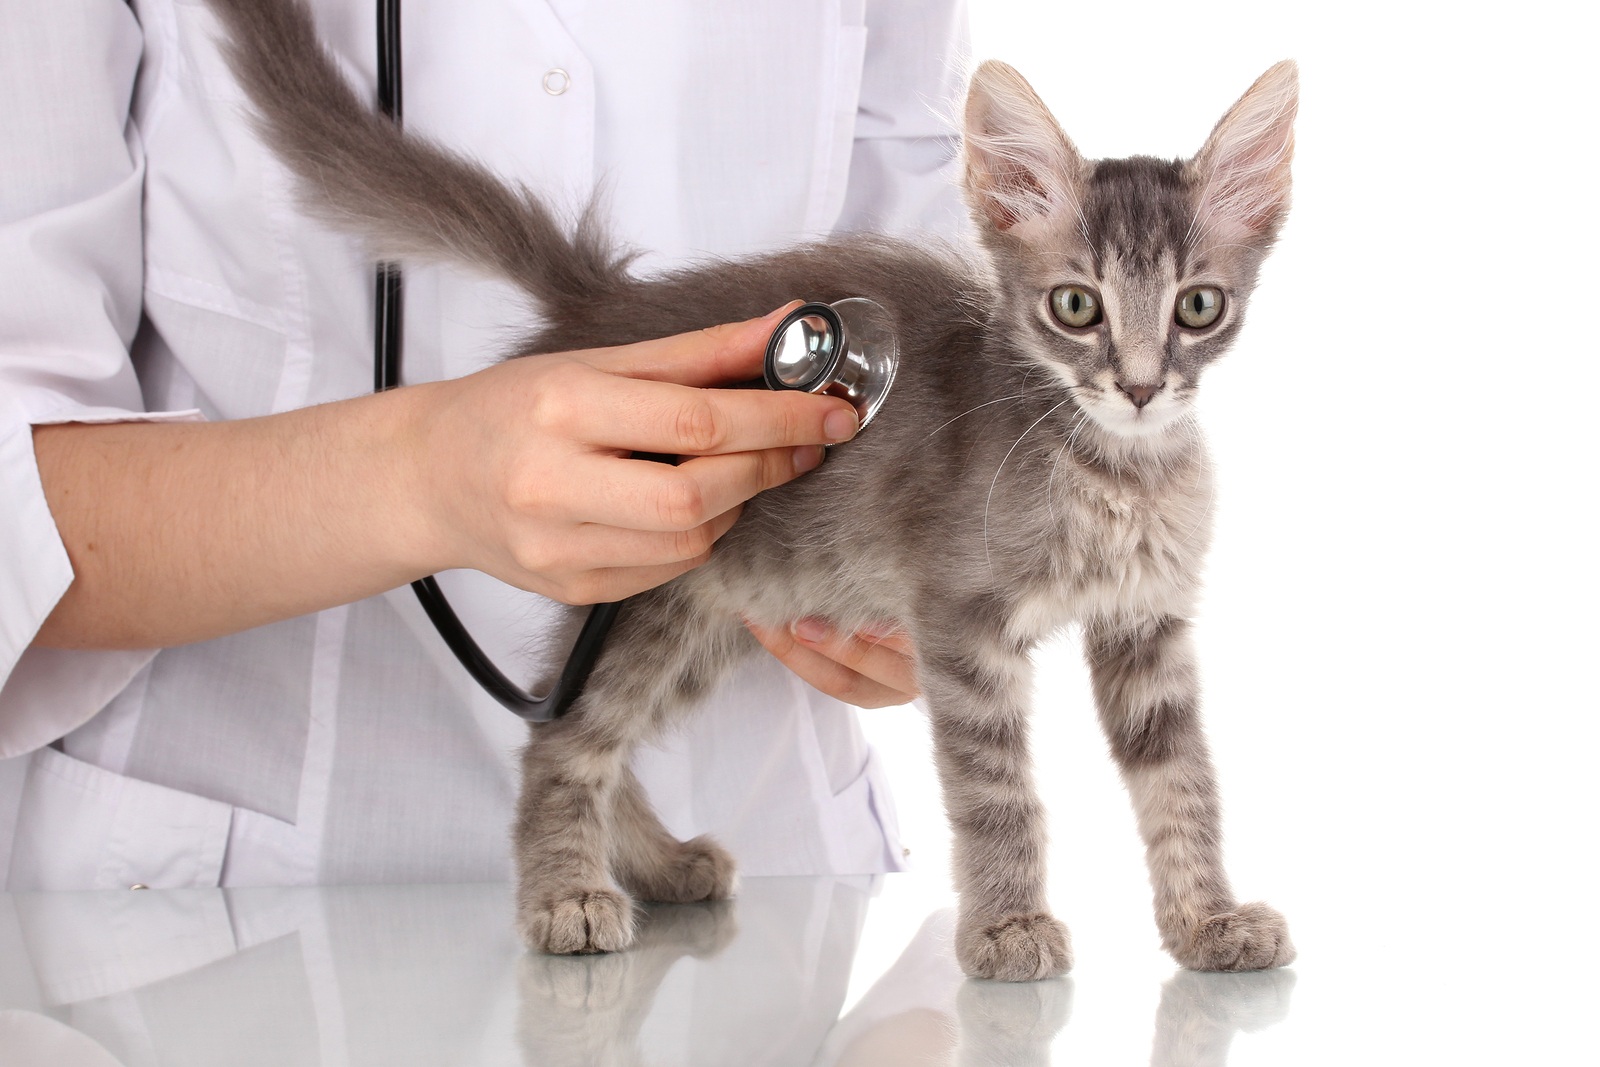 Need to Work with an Experienced Veterinary Attorney